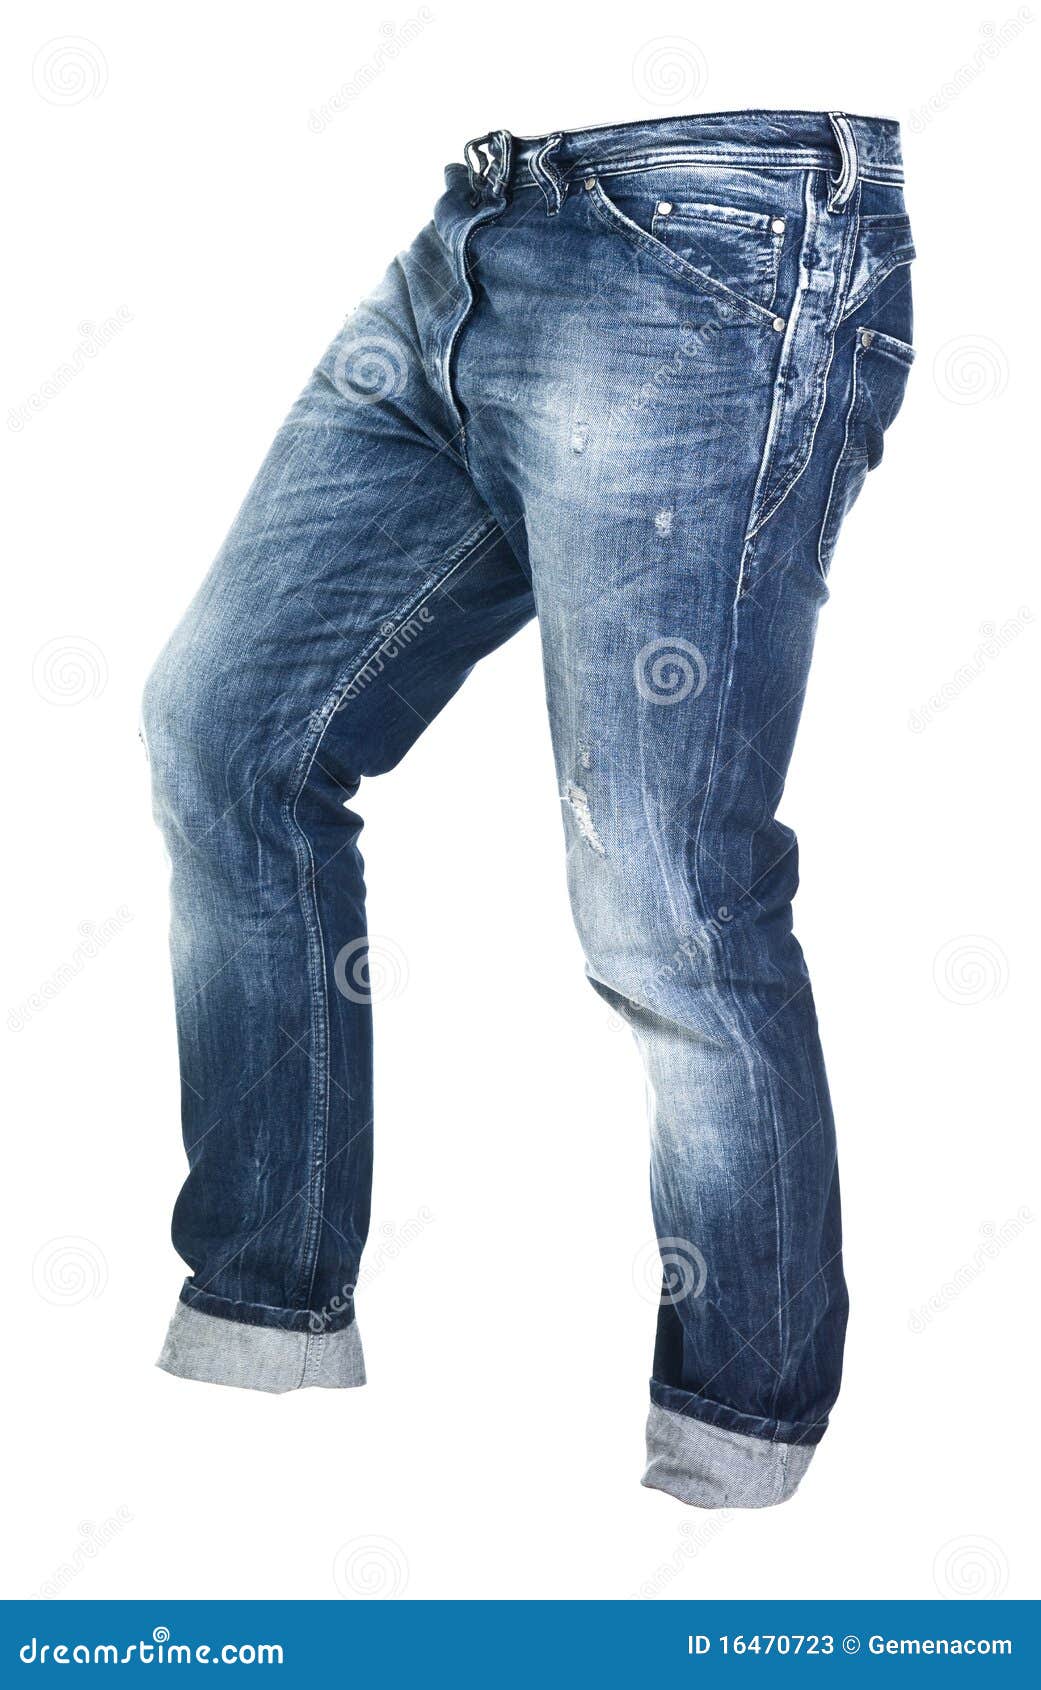 Worn blue jeans isolated stock image. Image of pants - 16470723